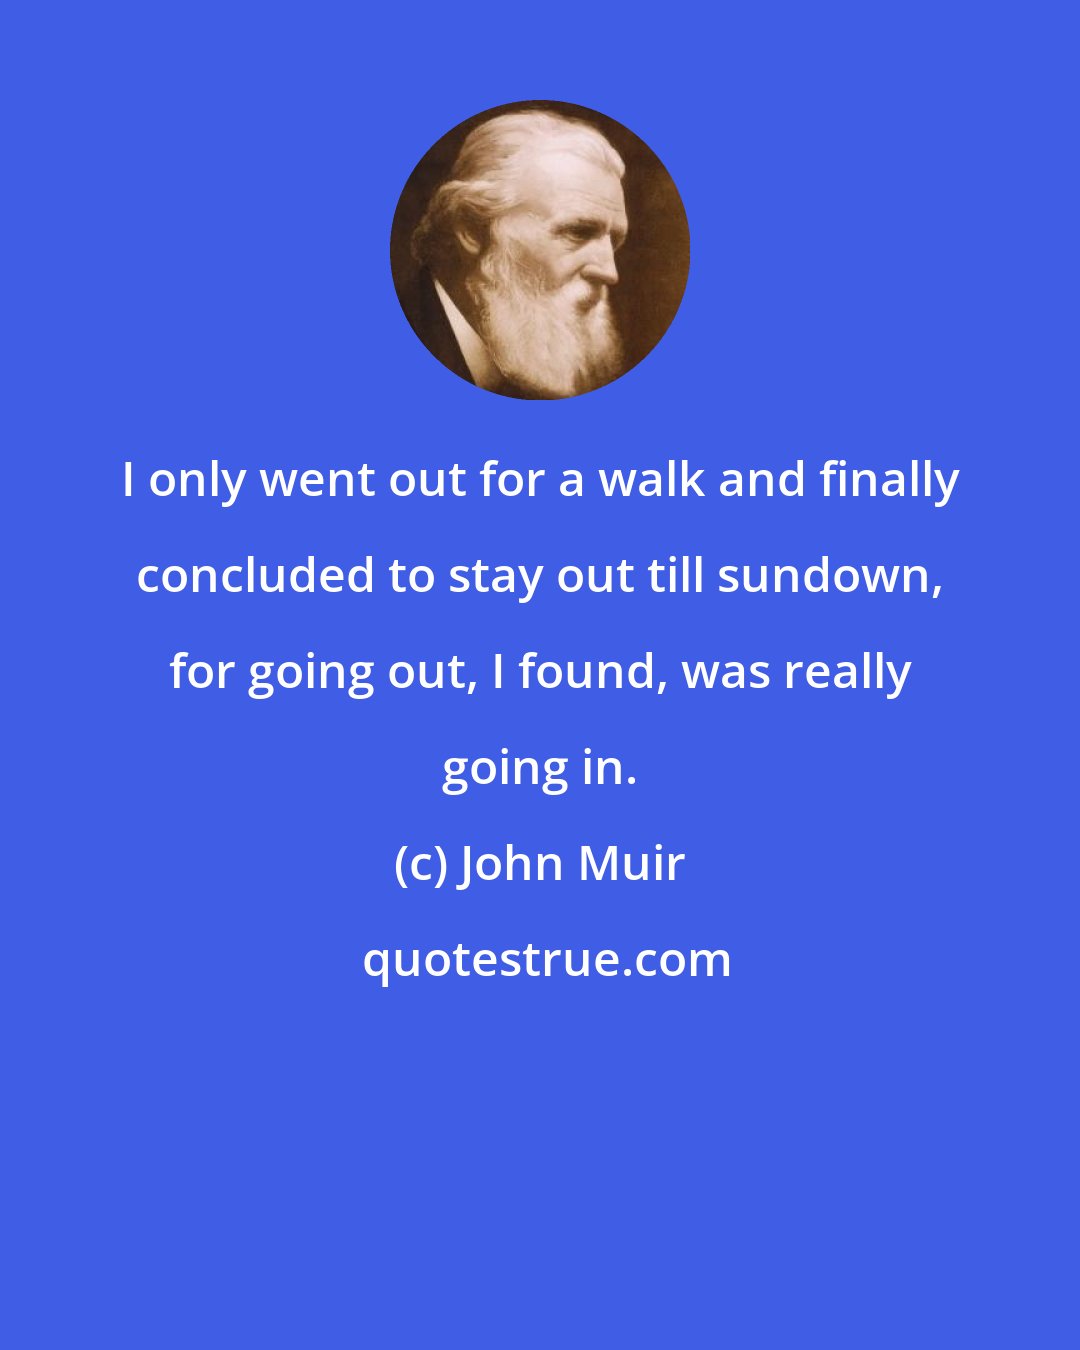 John Muir: I only went out for a walk and finally concluded to stay out till sundown, for going out, I found, was really going in.